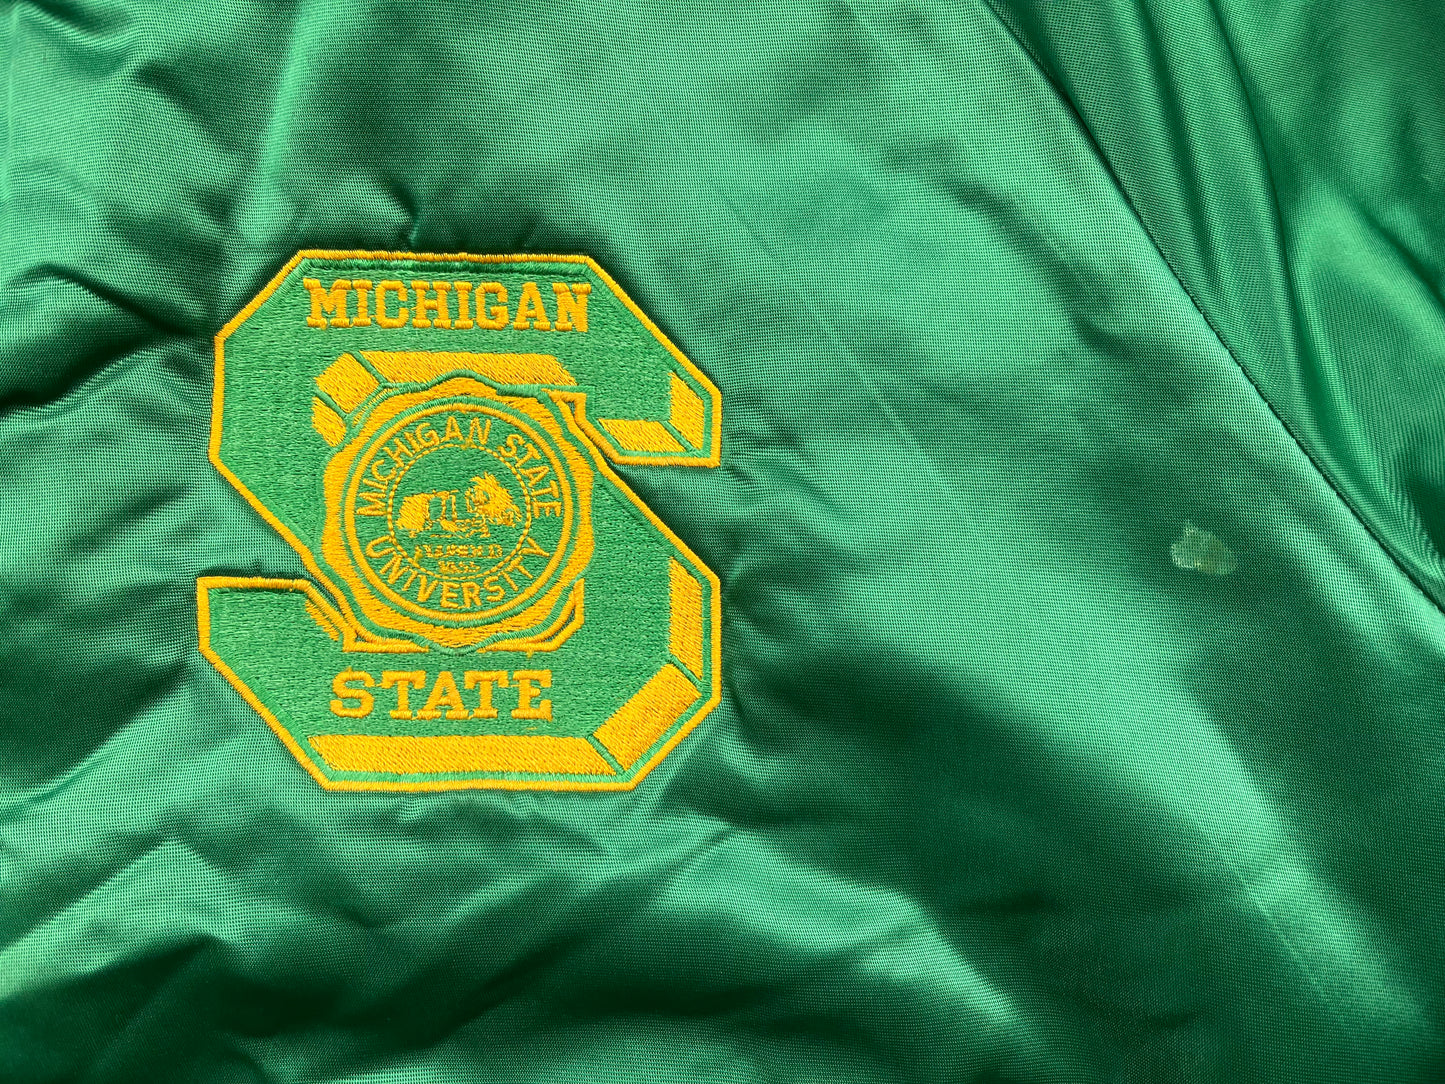 Michigan State Patched Satin Jacket